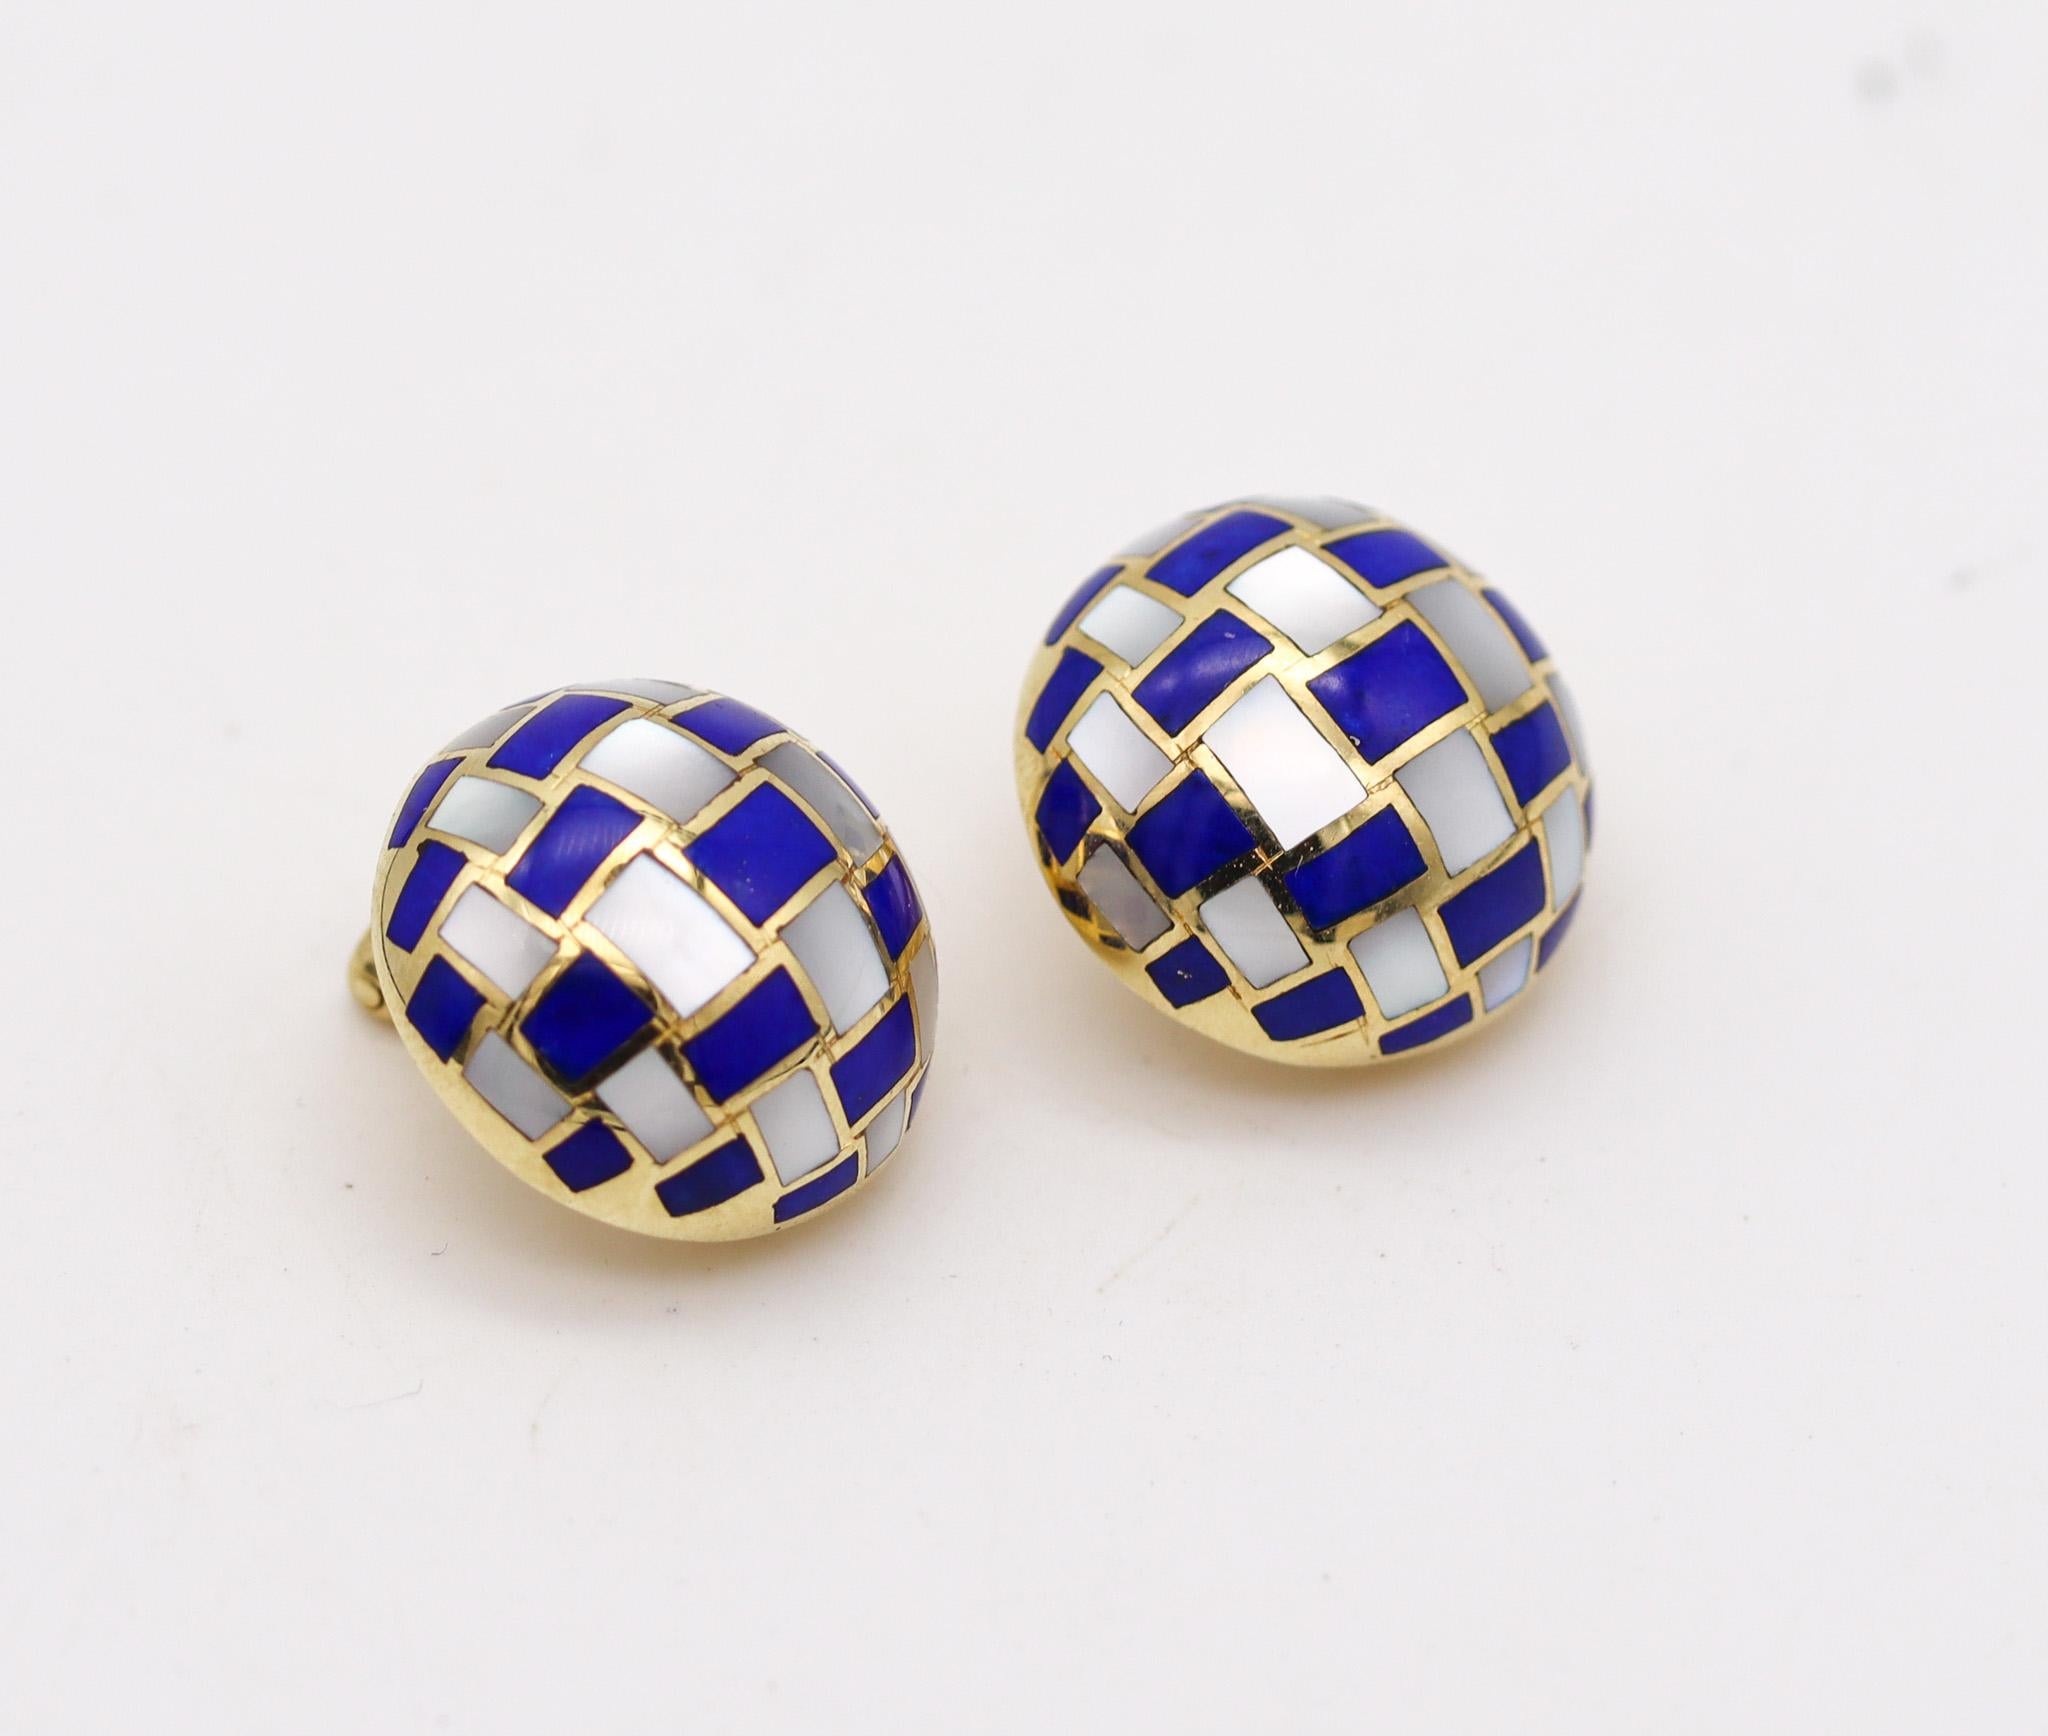 Geometric earrings designed by Angela Cummings for Tiffany & Co.

Beautiful geometric pair of ear clips, created by Angela Cummings in New York city, back in the 1979. This pair of domed bombe earrings were carefully crafted in solid yellow gold of